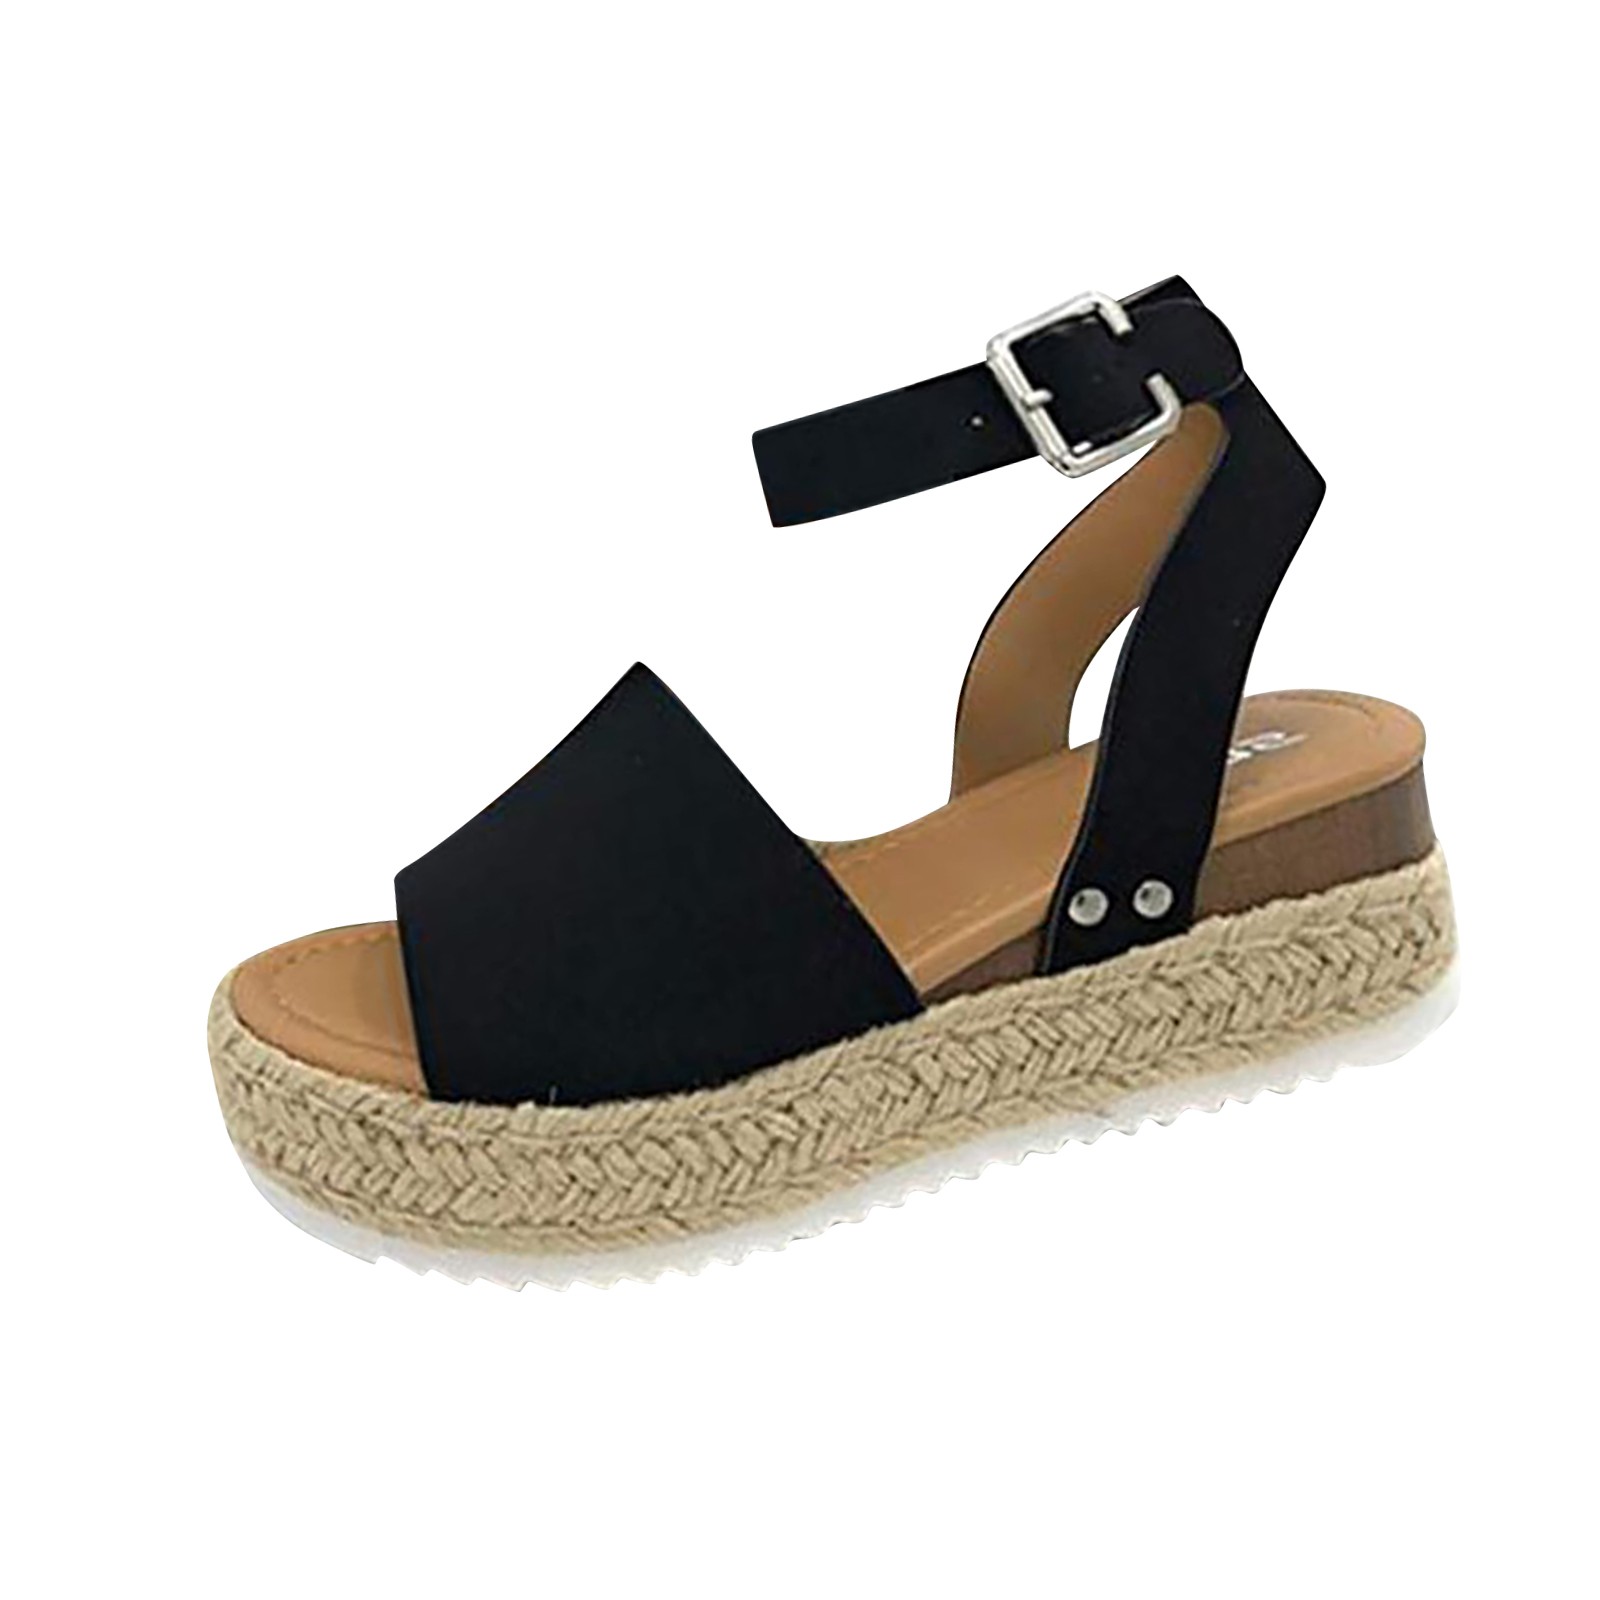 Azrian Woman Summer Sandals Open toe Casual Platform Wedge Shoes Casual Canvas Shoes - image 4 of 5